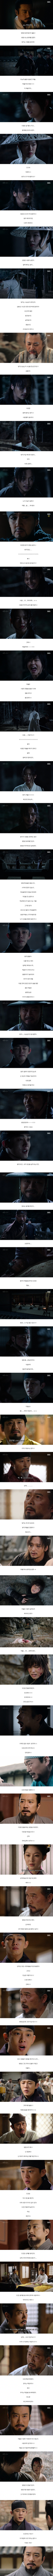 episode 36 captures for the Korean drama 'Six Flying Dragons'